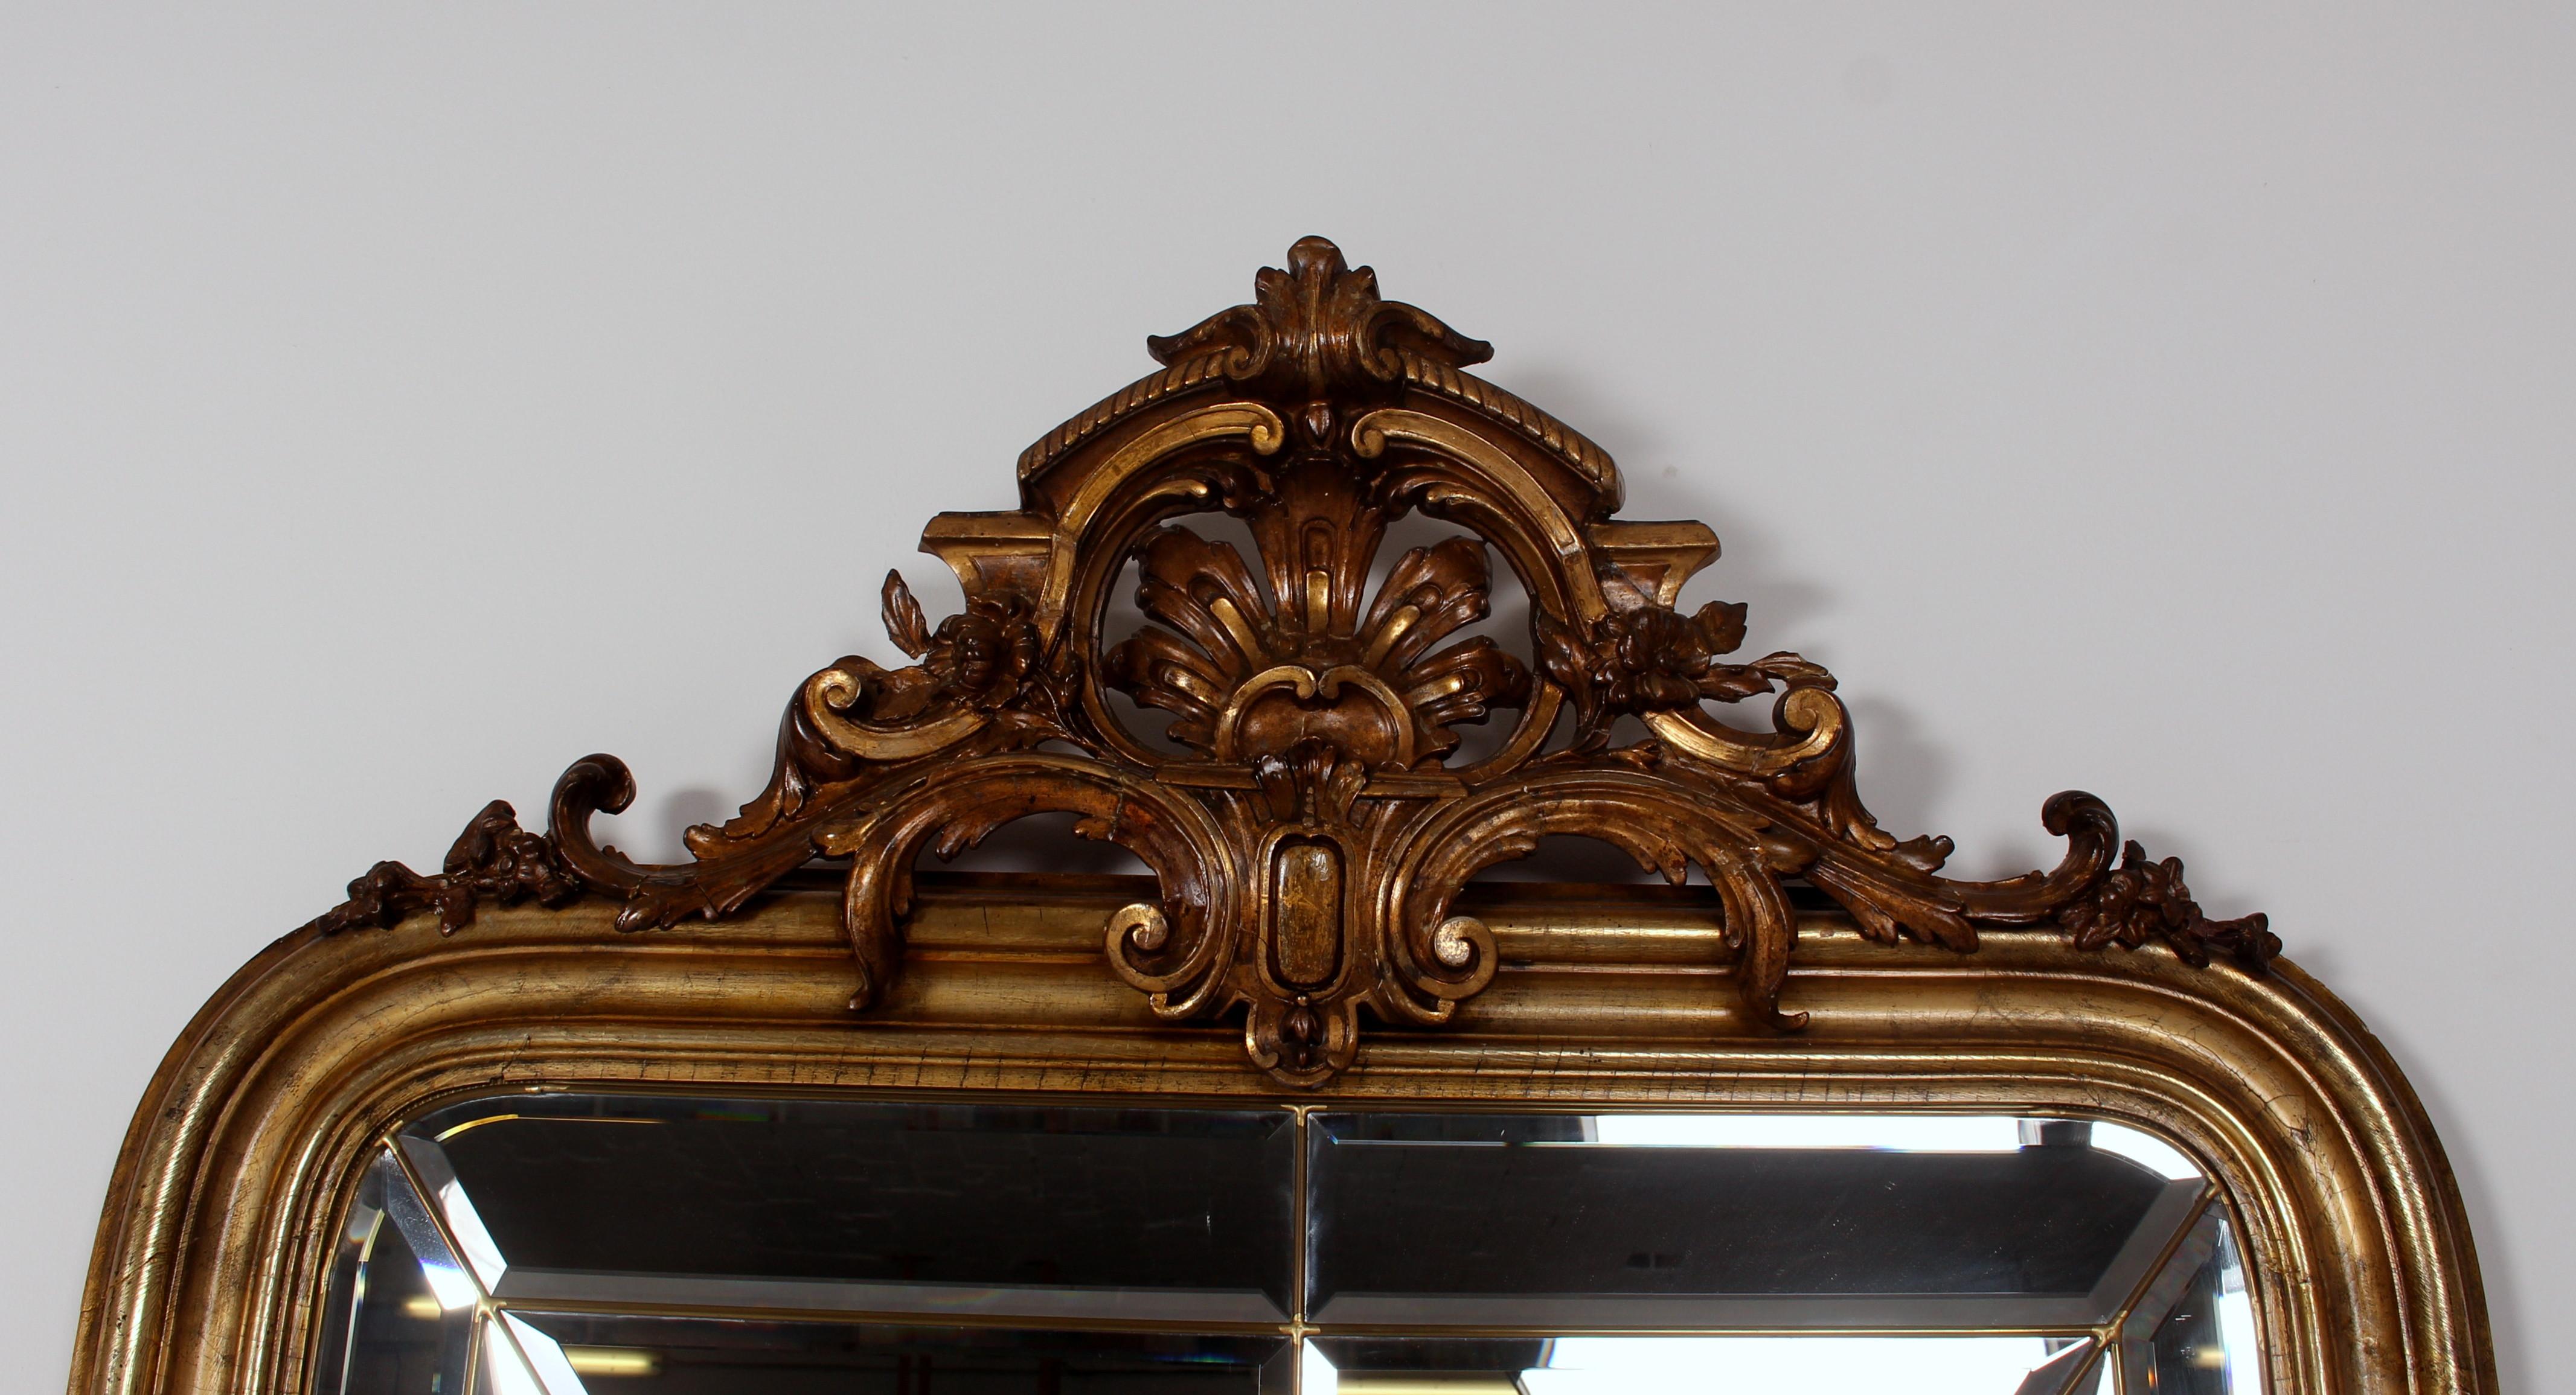 Faceted Louis-Seize Palace Size 19th Century Italian Mirror Stucco / Facet Cut Baroque For Sale